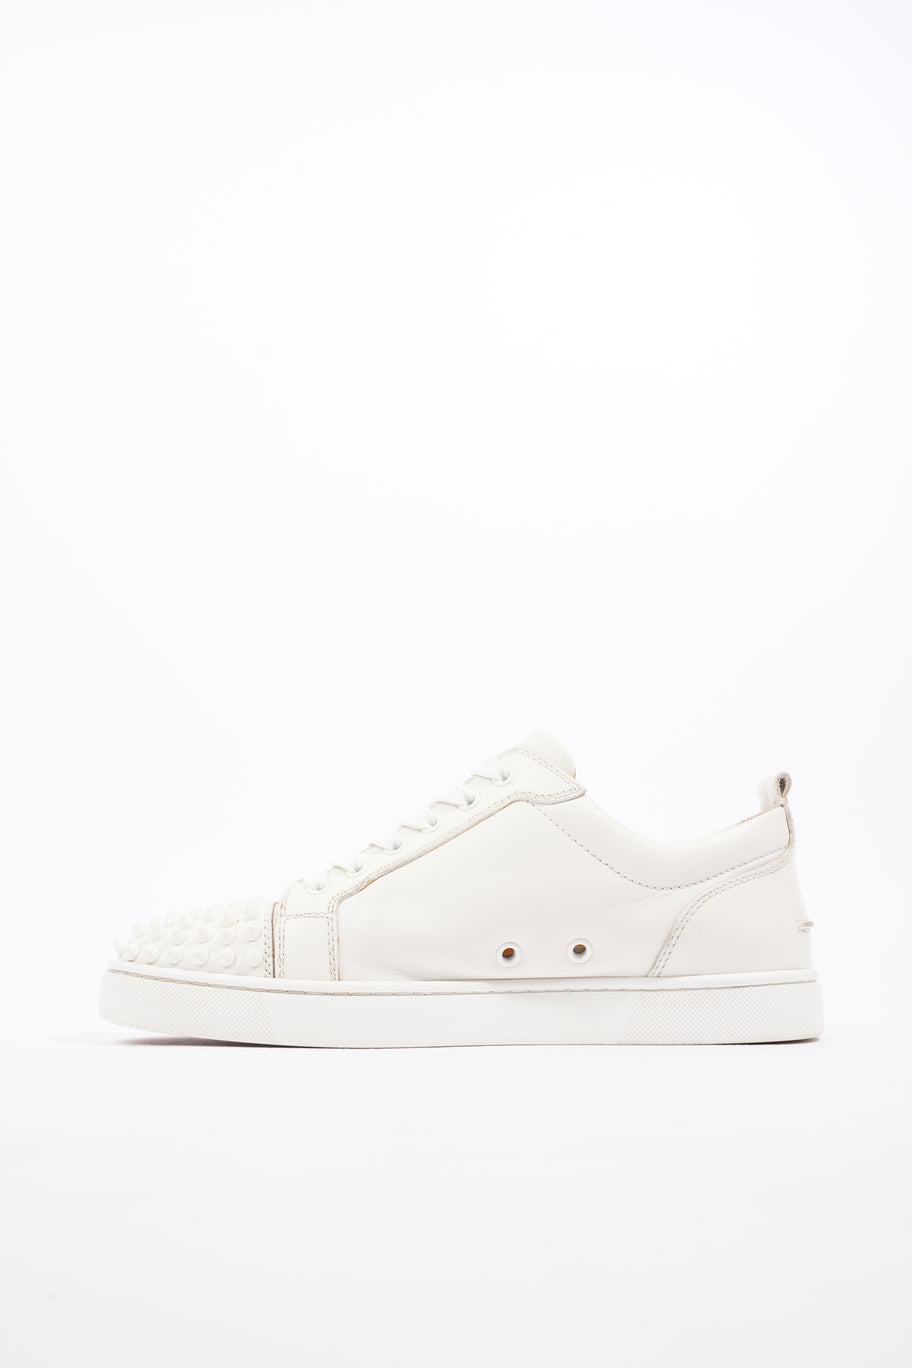 Louis Junior Spikes Sneakers White Leather EU 41 UK 7 Image 3